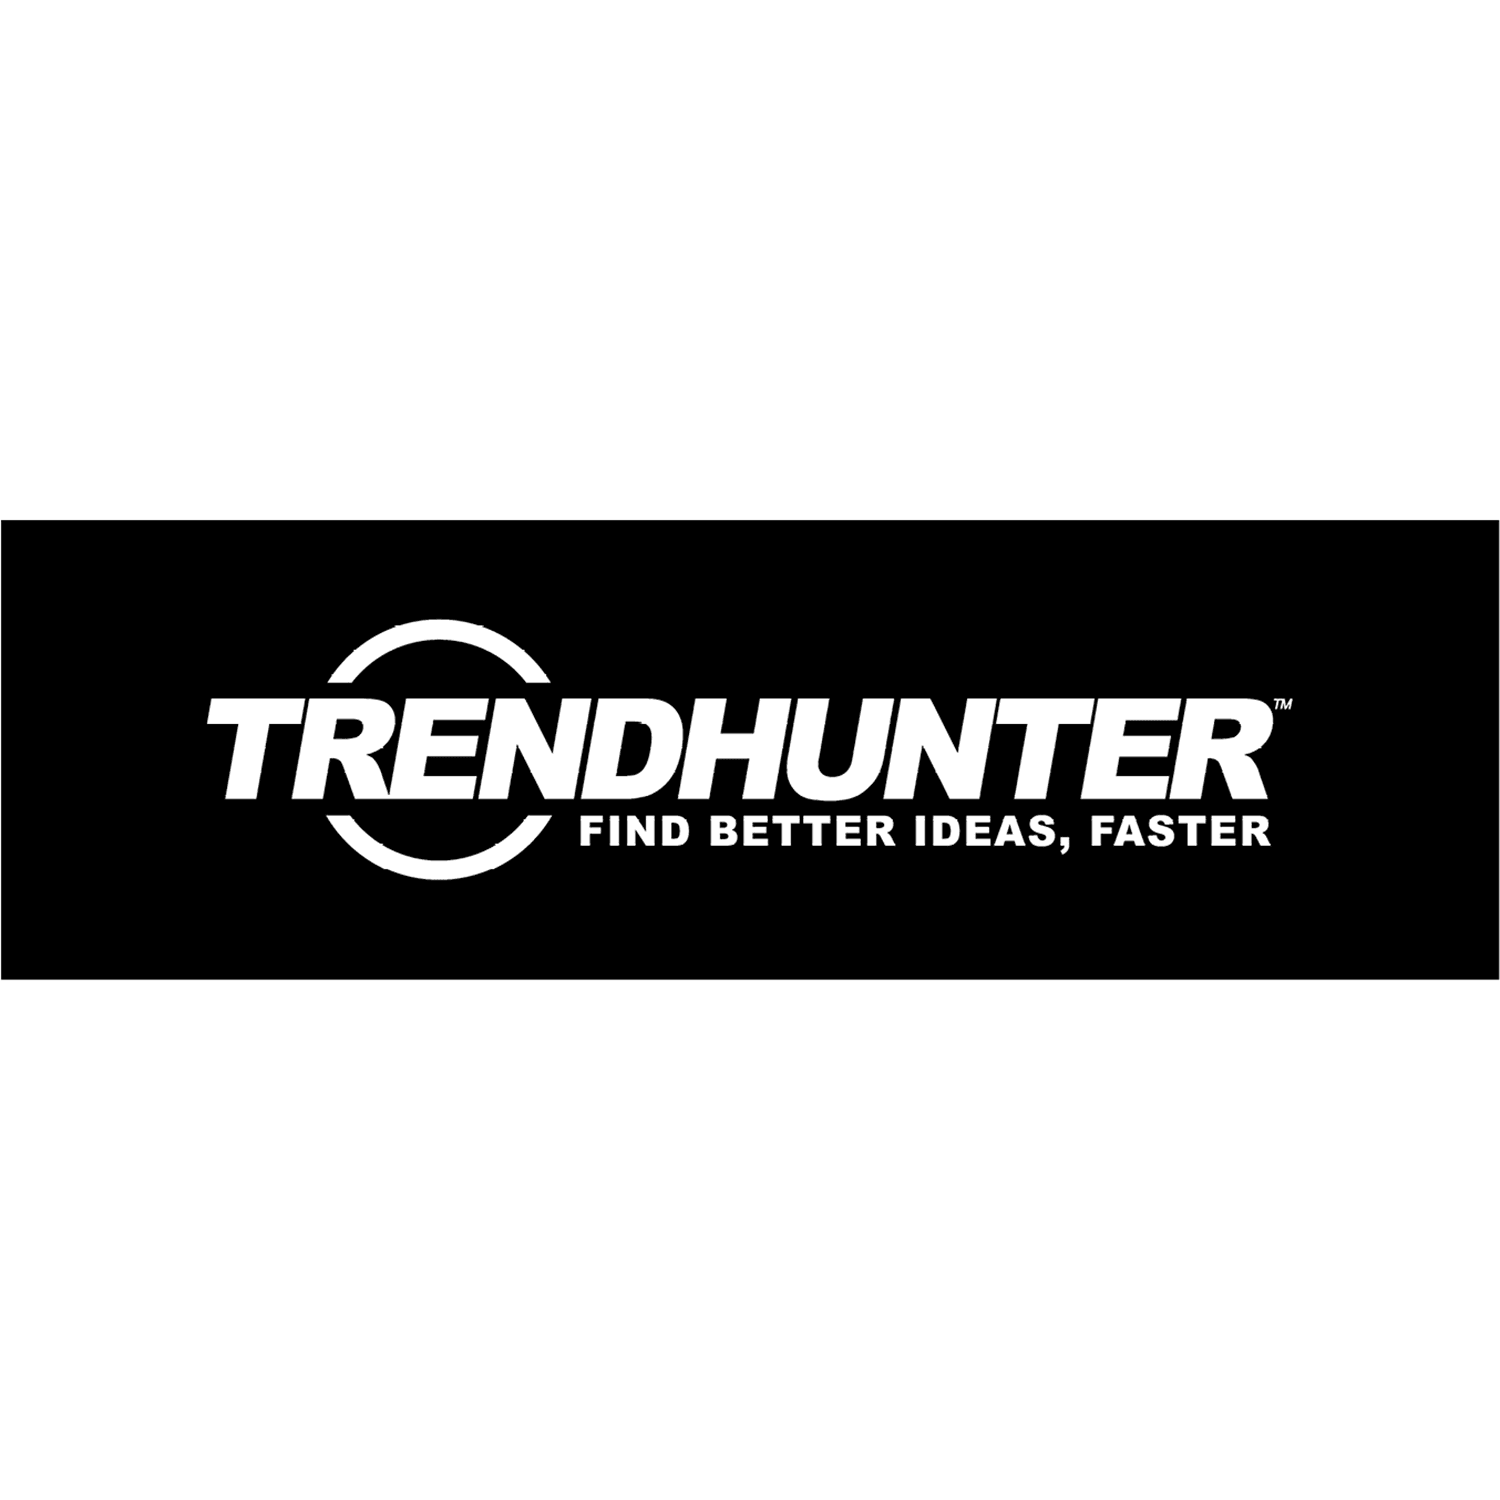 Trendhunter - SAVE ME FROM